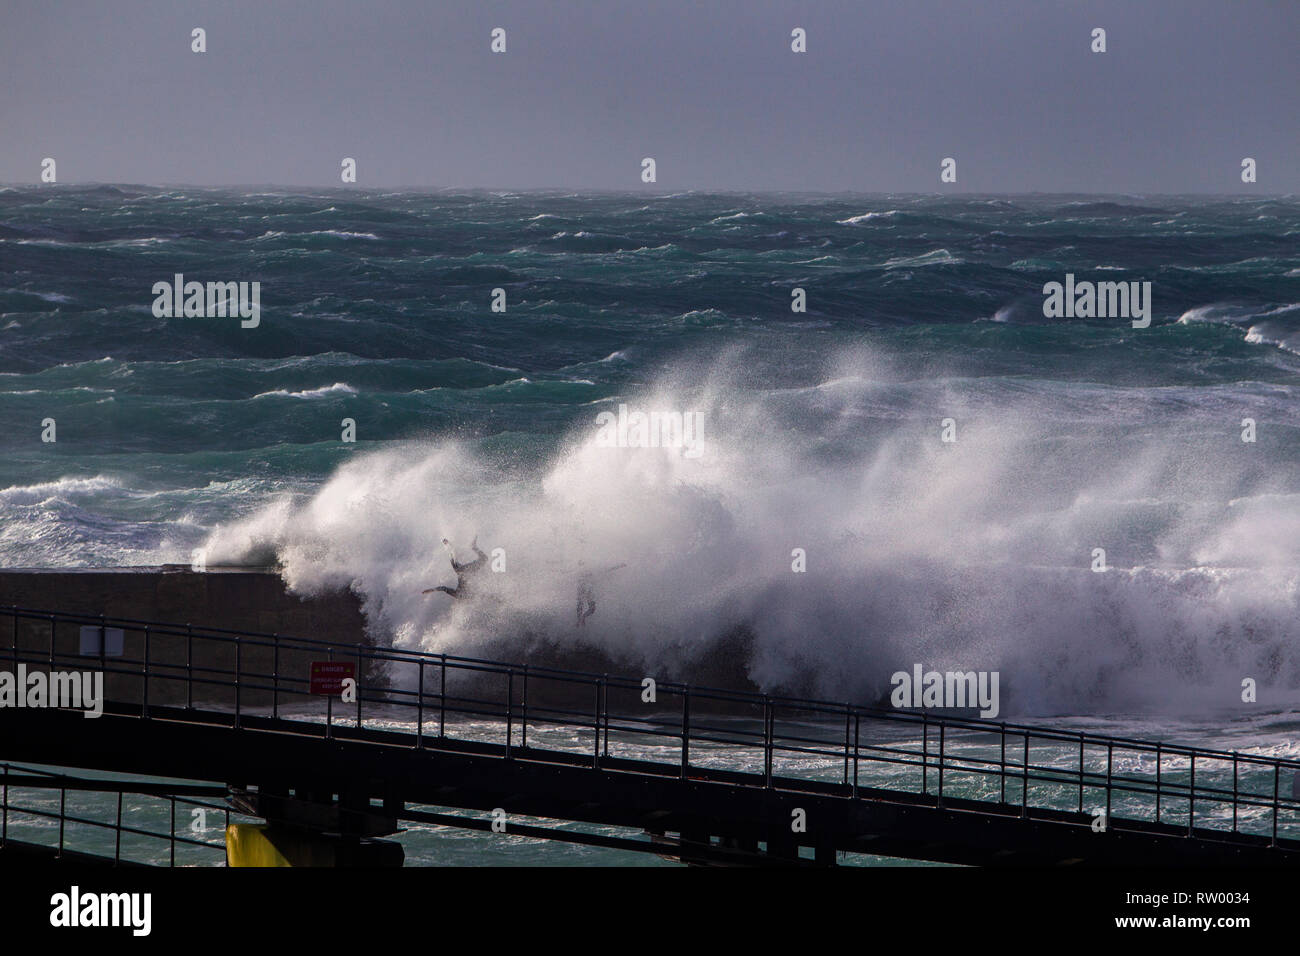 Sennen, Cornwall, UK. 3rd  March 2019. Gale force winds and 20ft high waves lash the granite cliffs of Cornwall. Daring jumpers get caught by some huge waves swamping the pier. Credit: Mike Newman/Alamy Live News. Stock Photo